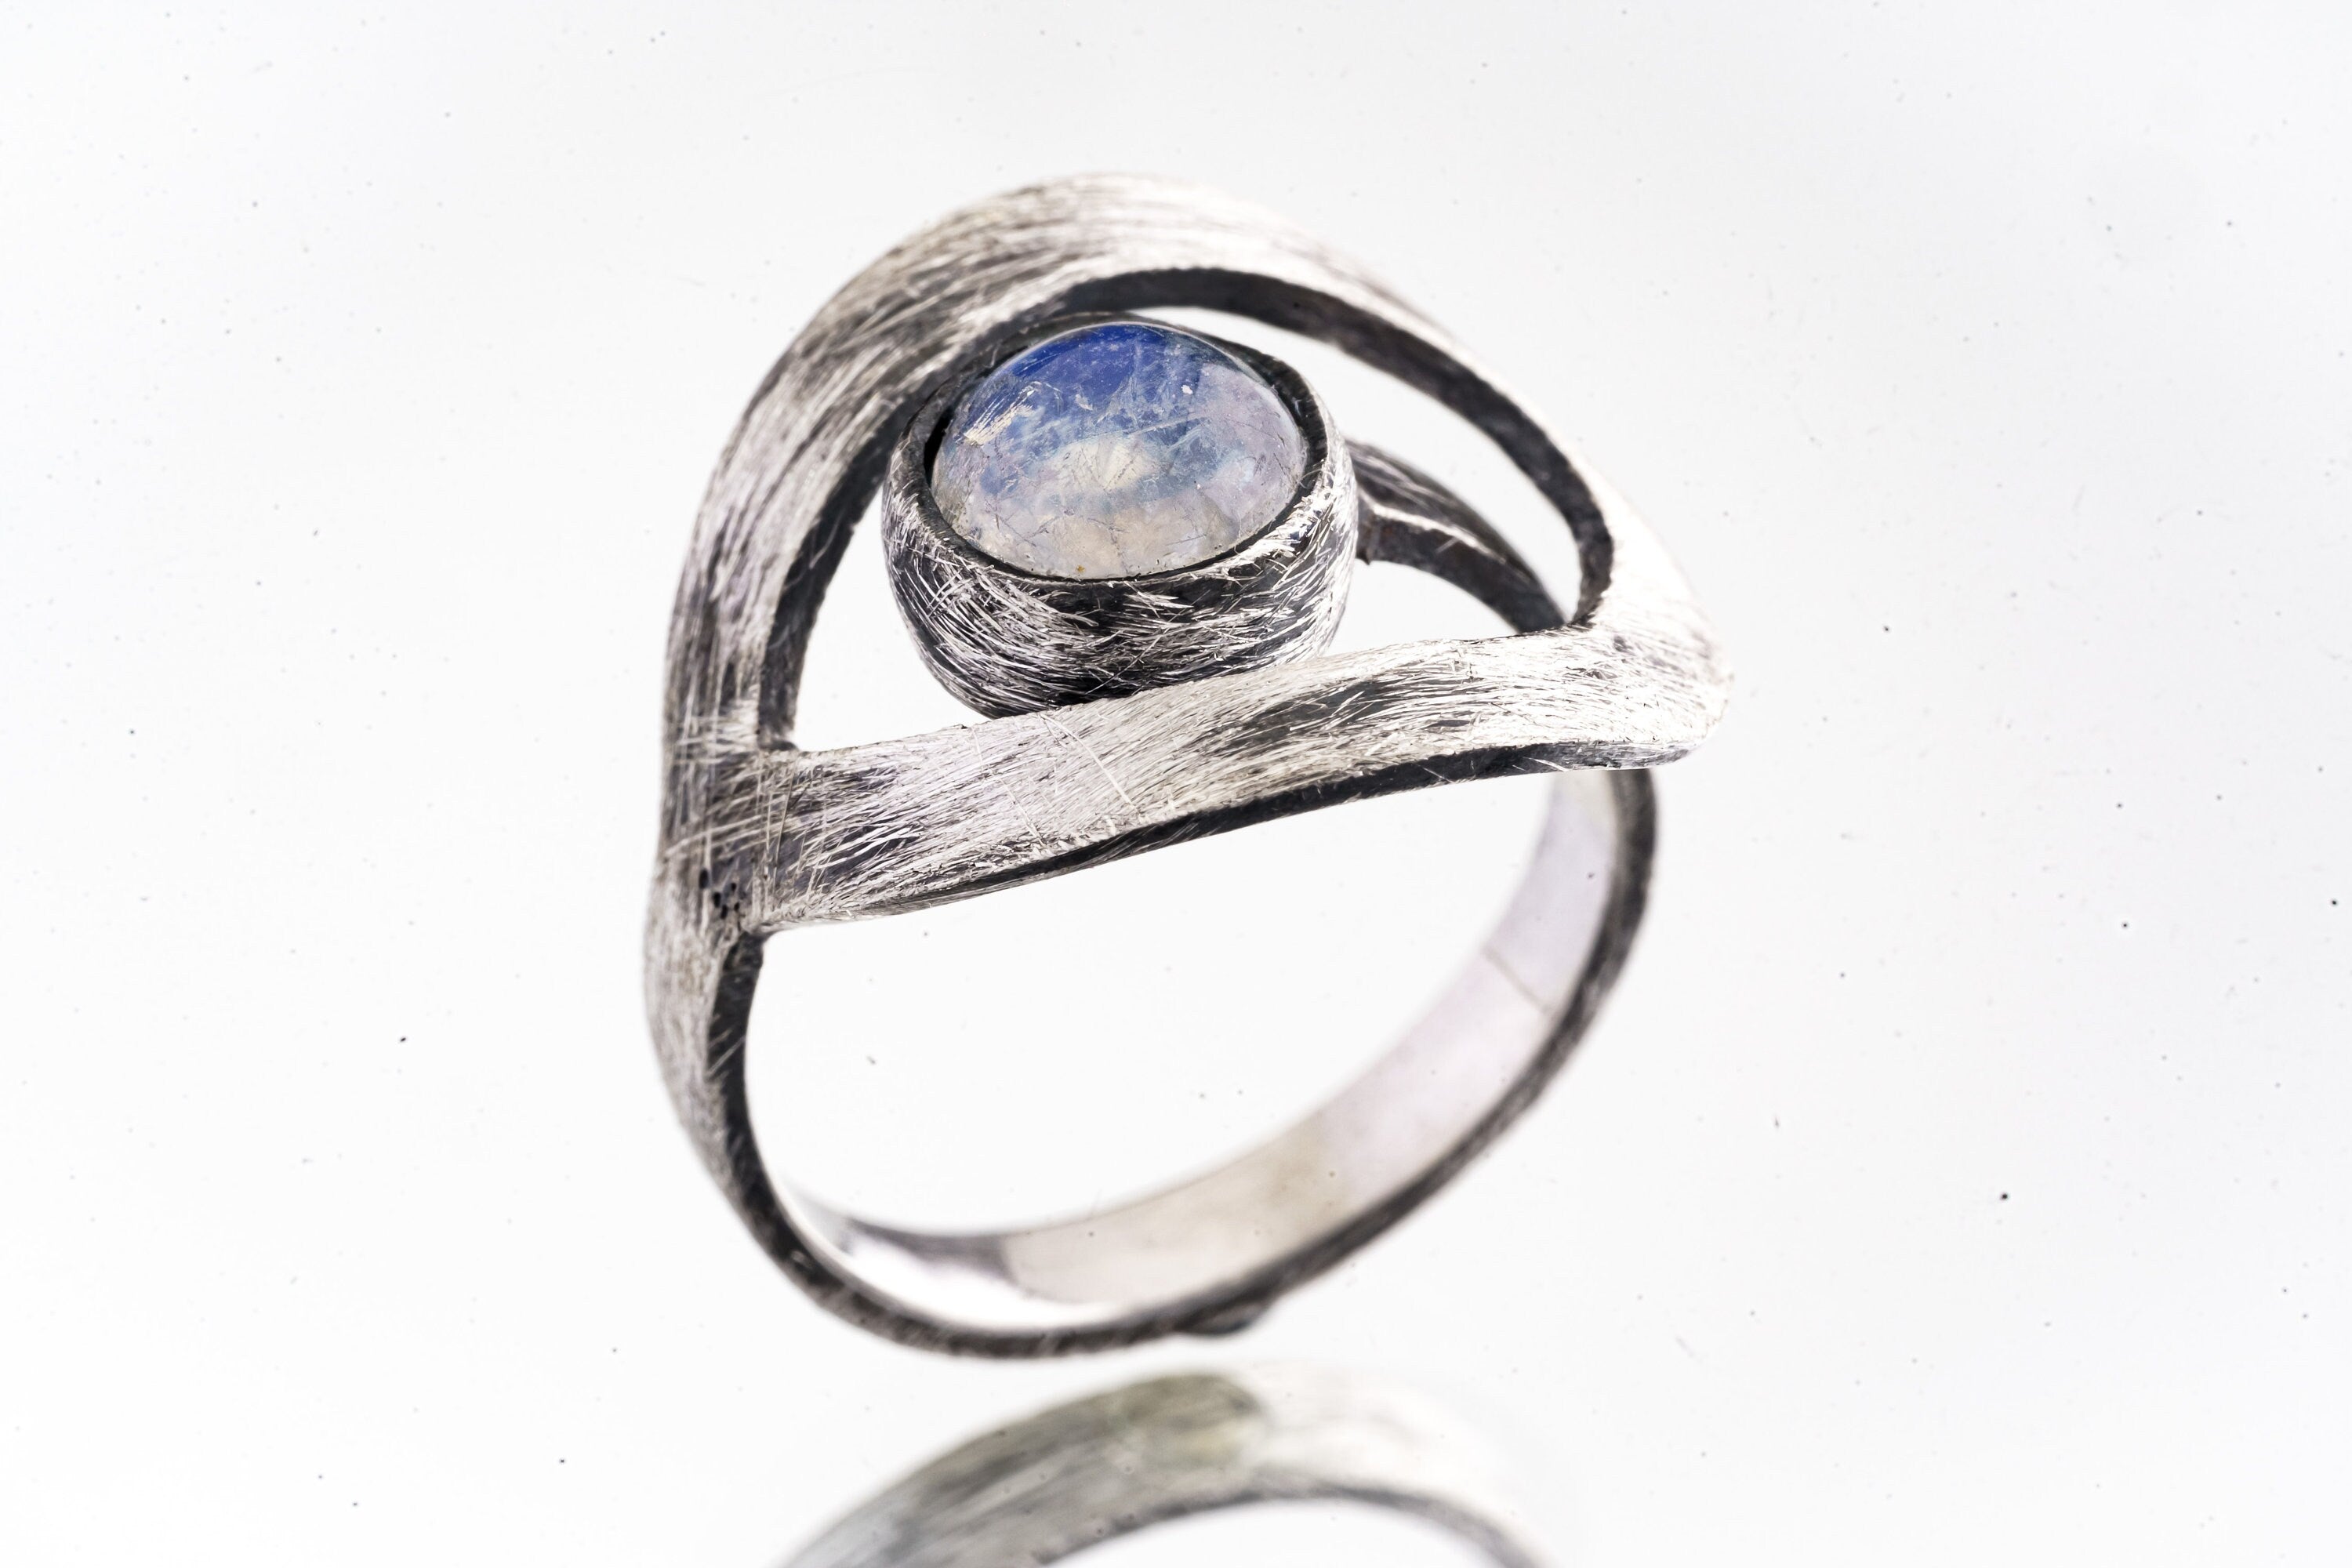 Round Blue Moonstone - 925 Sterling Silver - Heavy Set Adjustable Loop Ring - Scratch Textured - Size 5-9 US - NO/13